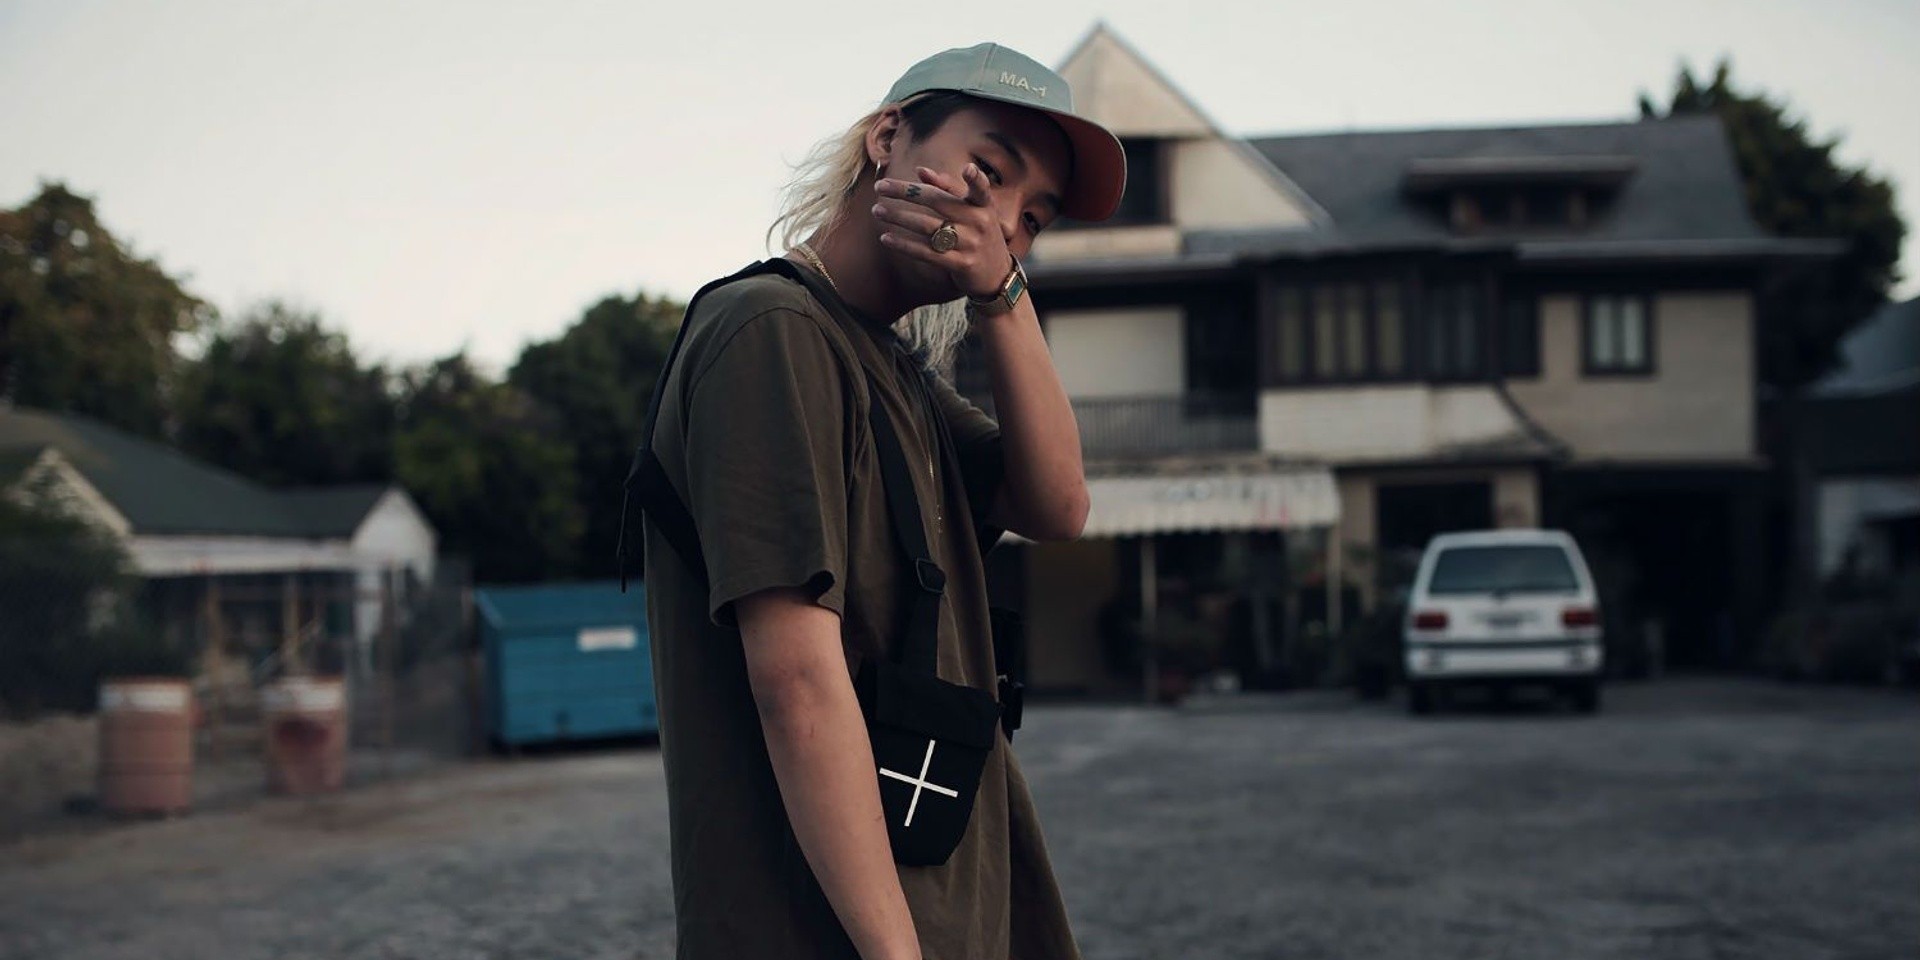 South Korean rapper Keith Ape is coming to Singapore